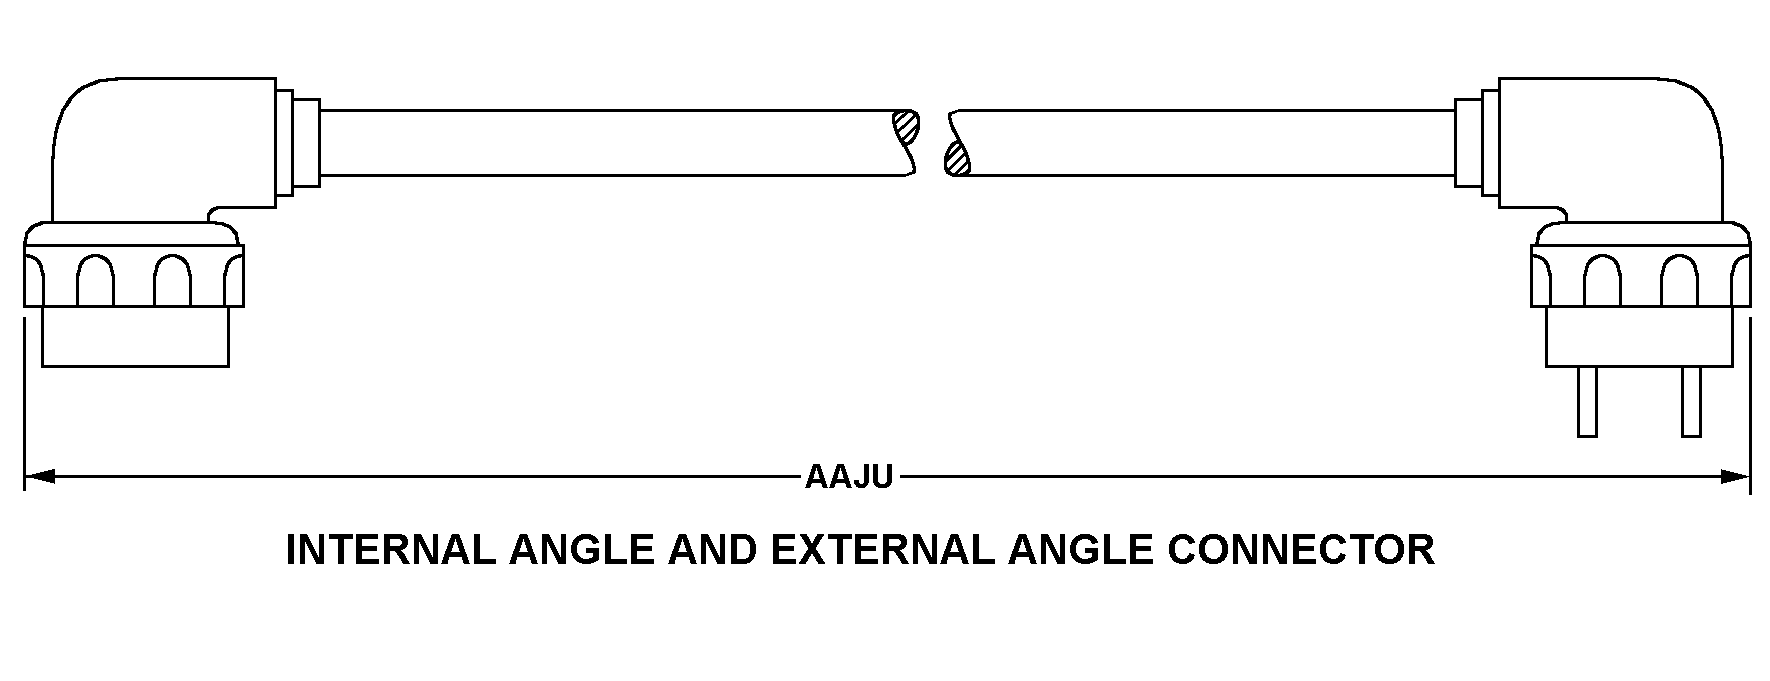 INTERNAL ANGLE AND EXTERNAL ANGLE CONNECTOR style nsn 5995-01-192-6655